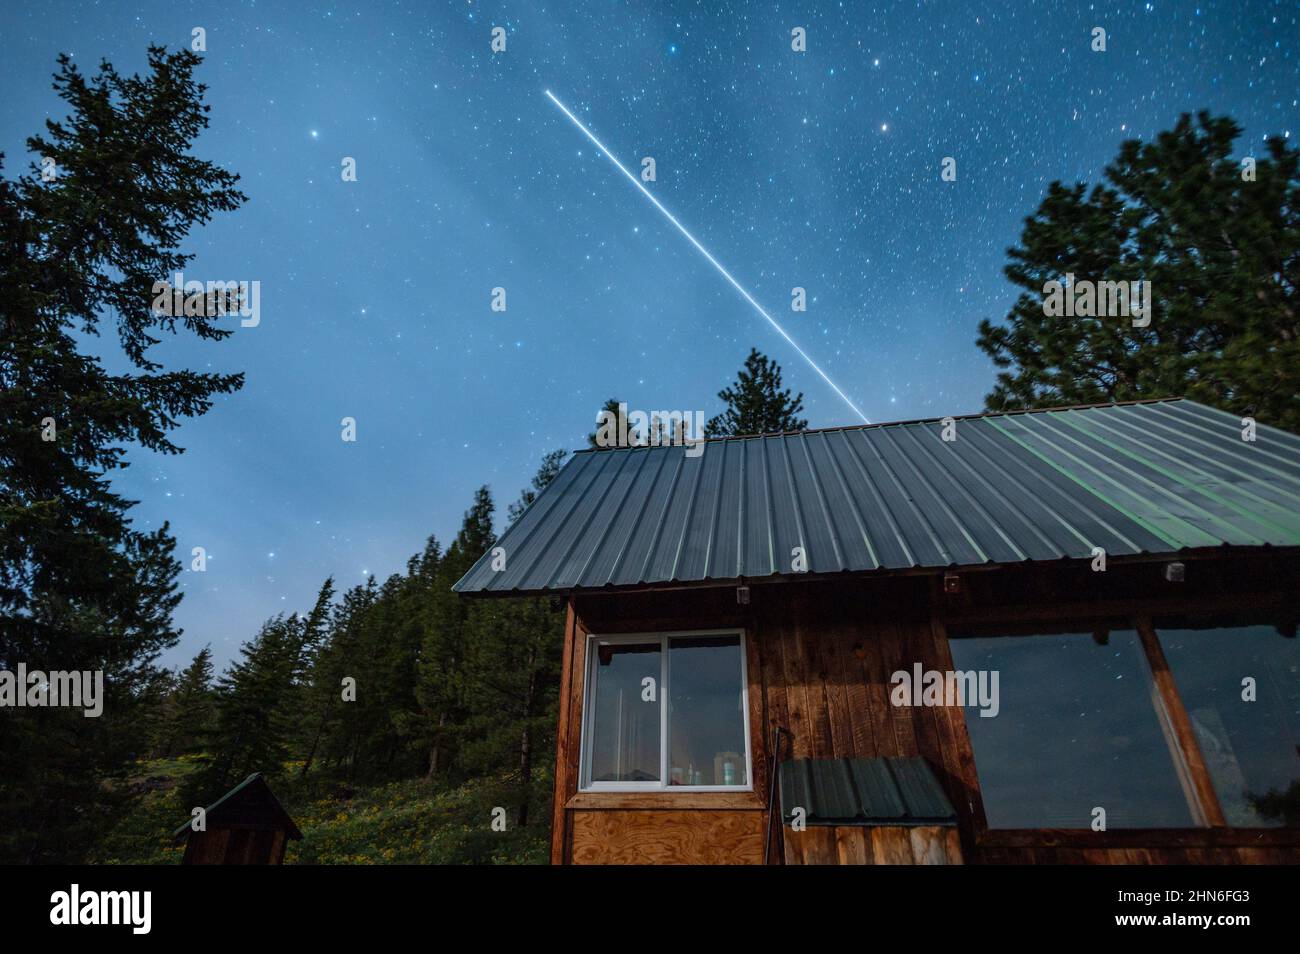 The International Space Station flying over a cabin at night Stock Photo